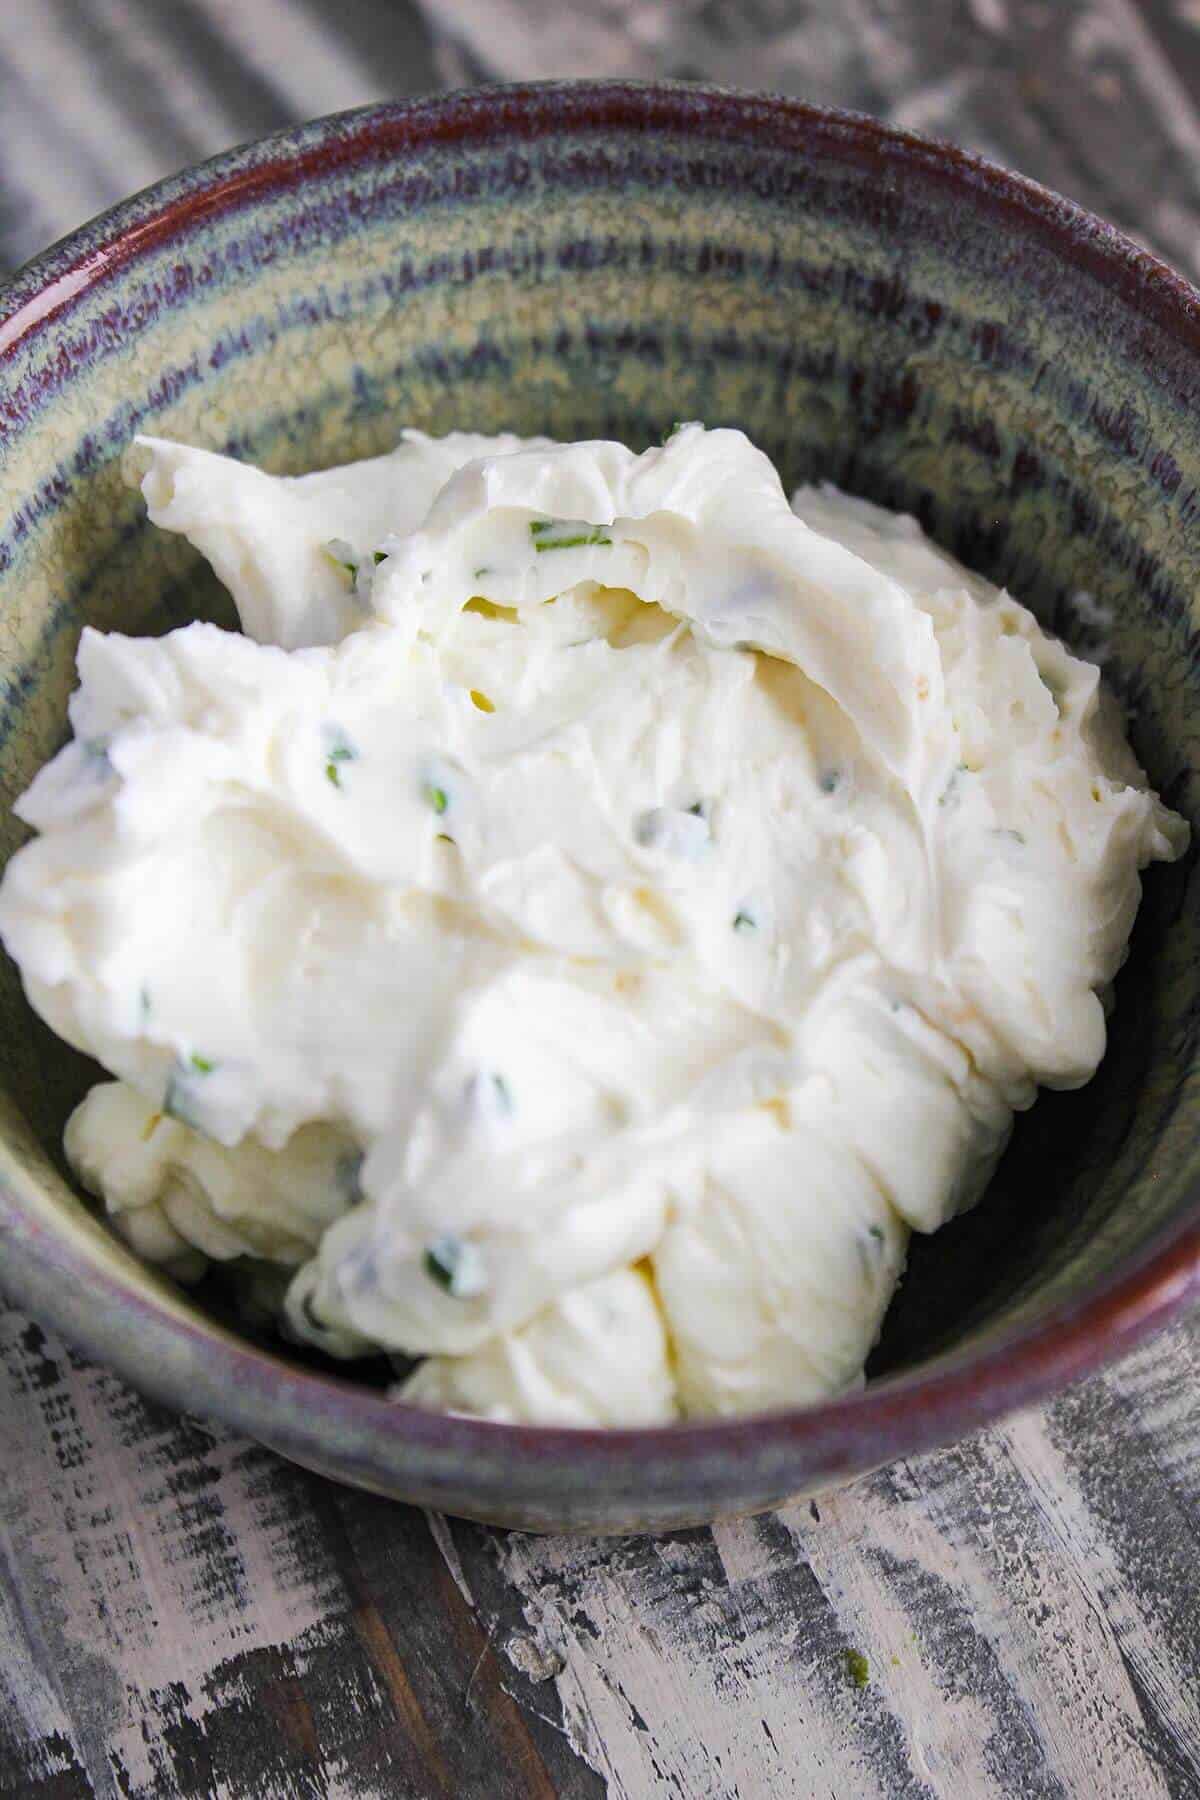 Chive cream cheese in a small bowl.